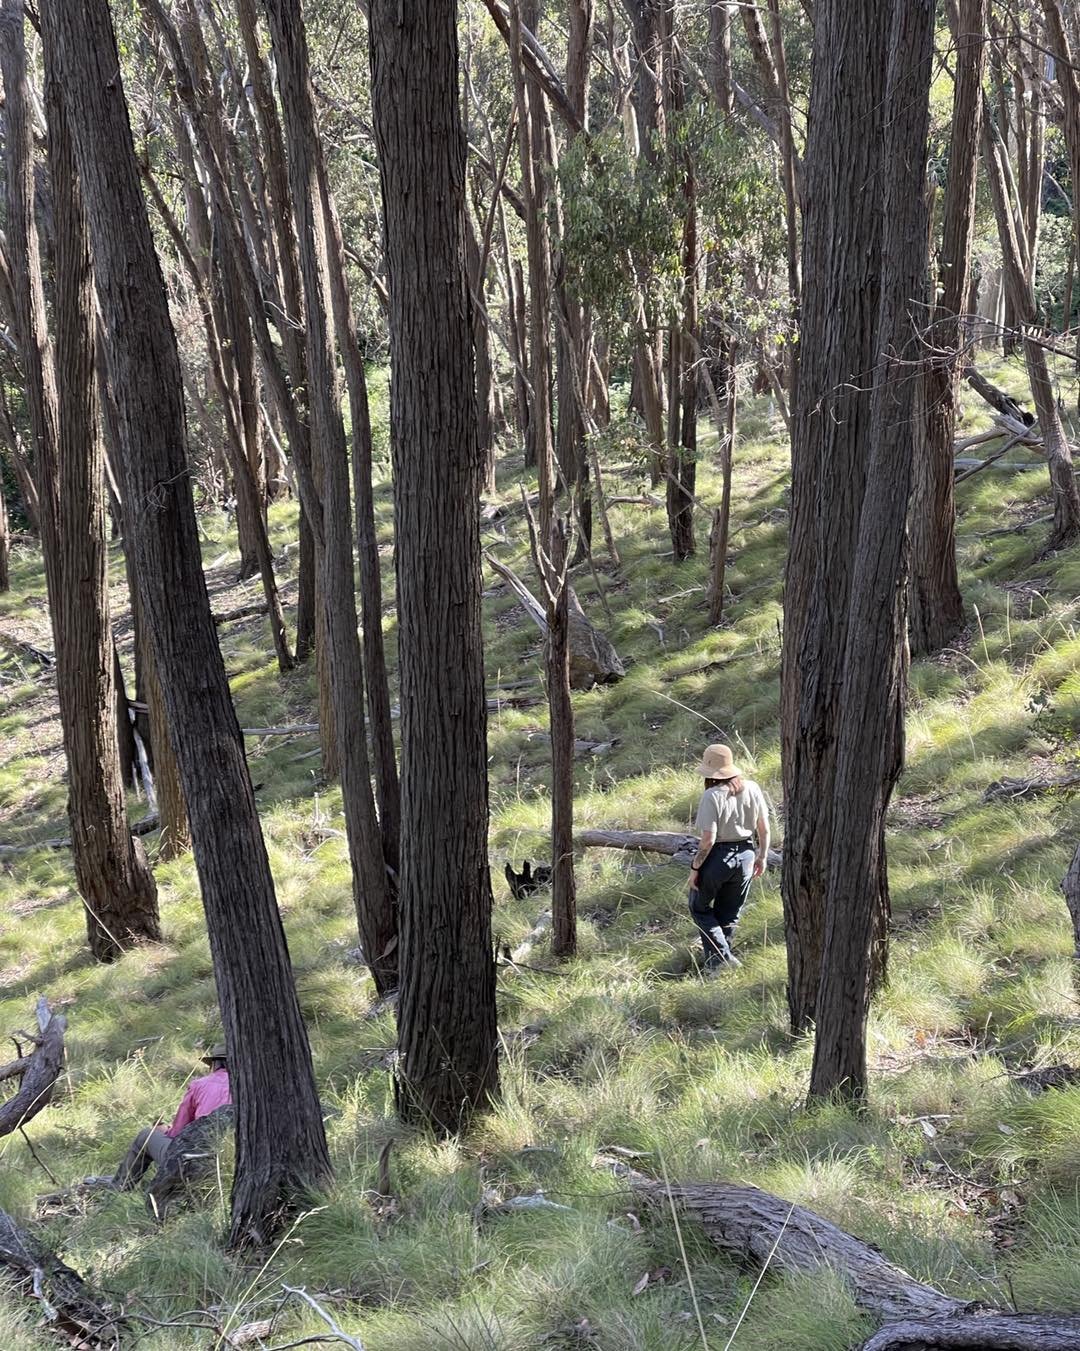 An off track seed collection foray for 2 of our volunteers. This northeast facing hillside is typical of this section of Mt Murramurrangbong (near Kiewa). Mostly red stringybarks with occasional Brittle gums. And a grassland dominated by red anther w